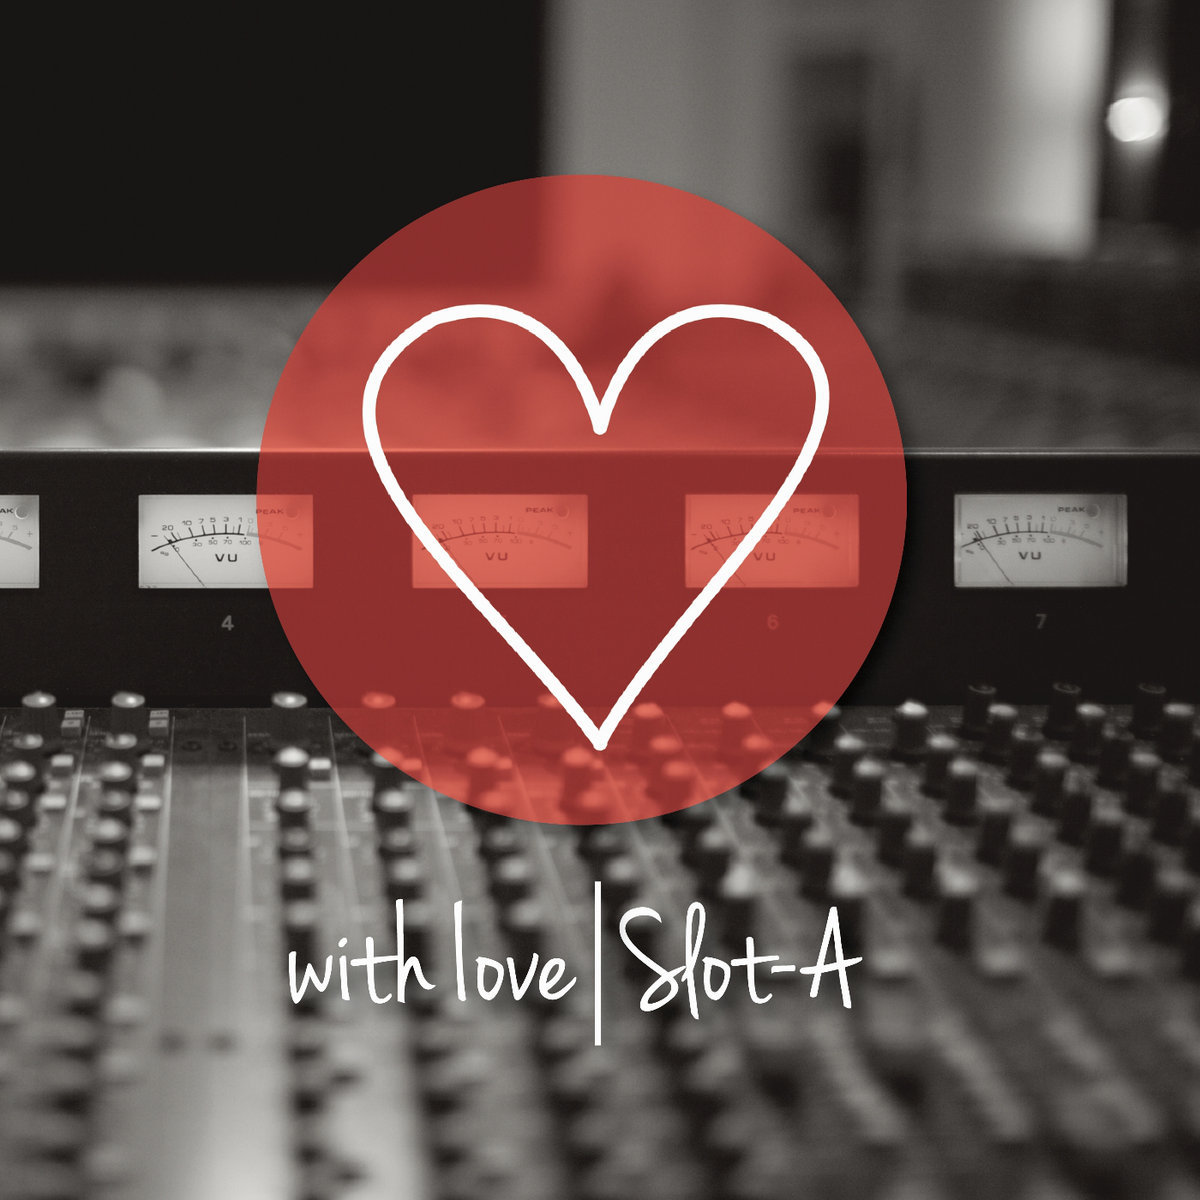 Slot-A - "With Love" (Release)